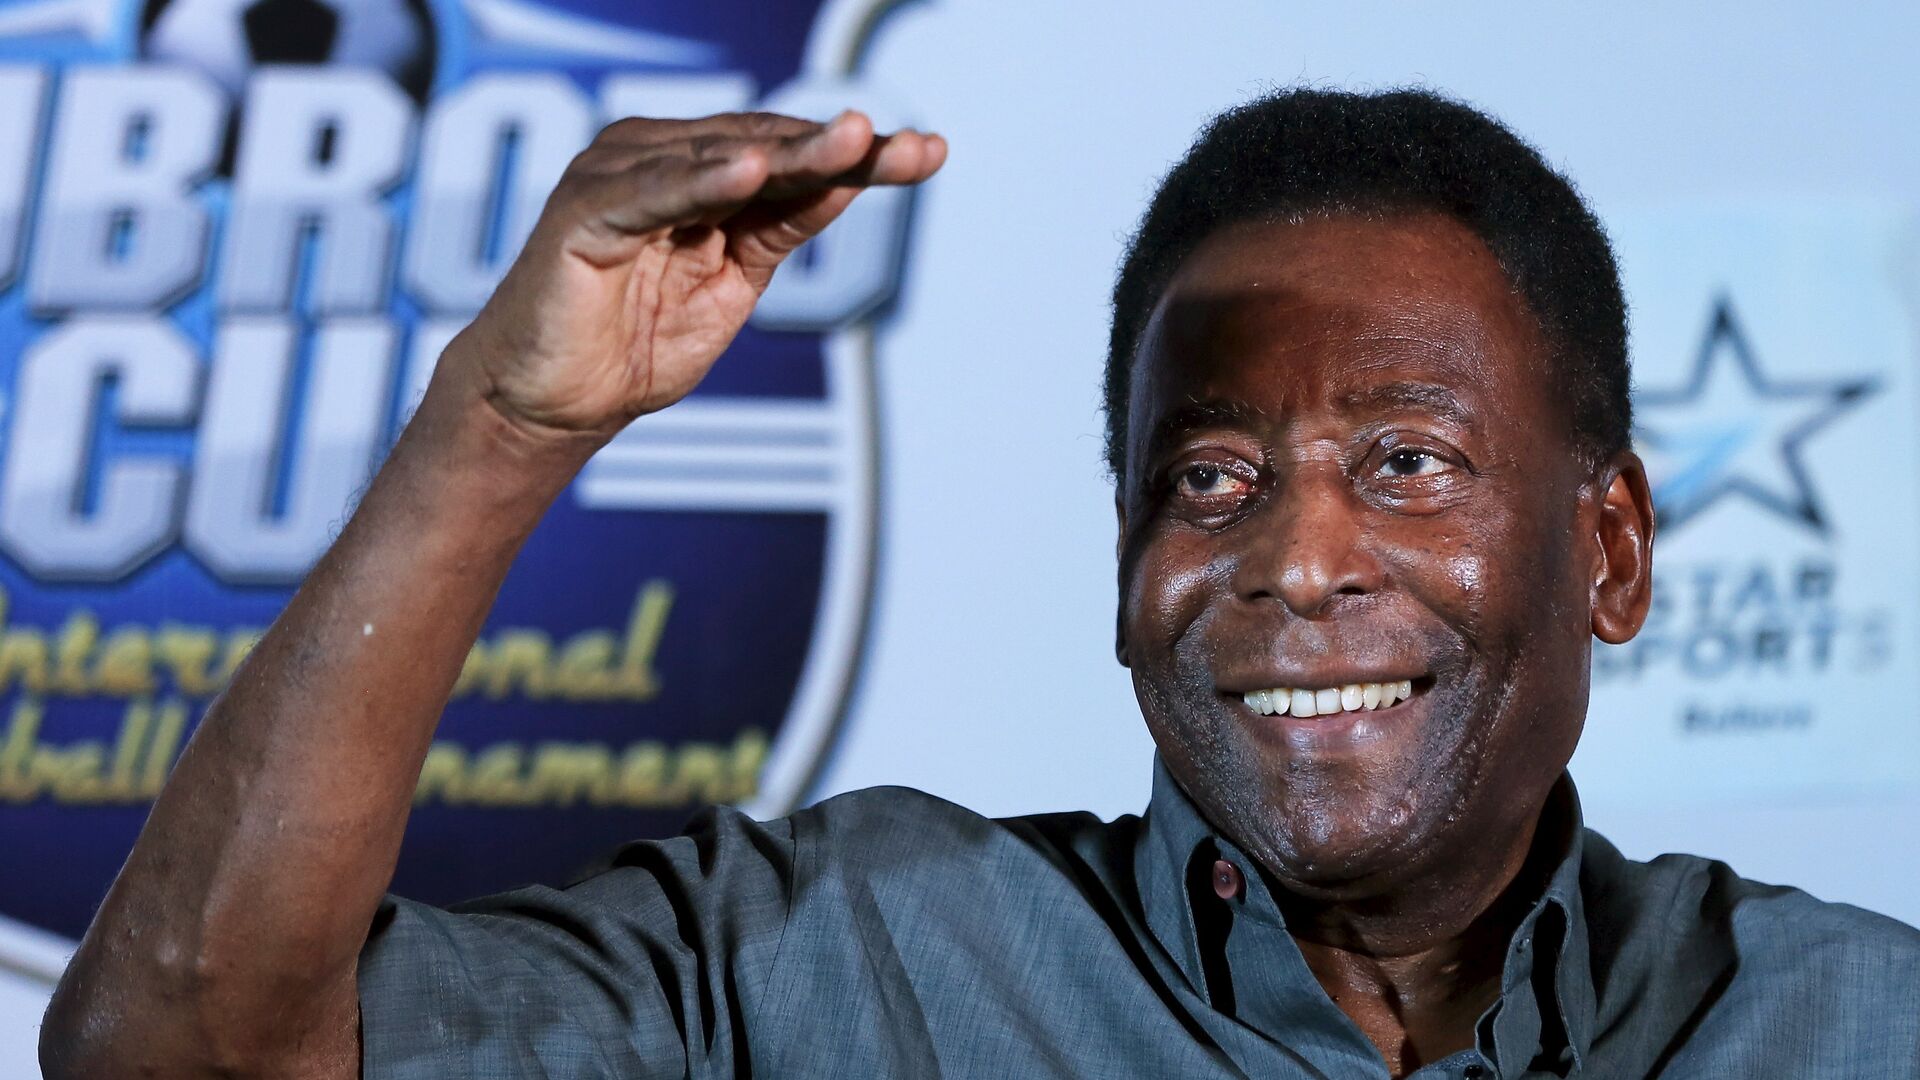 Legendary Brazilian soccer player Pele gestures during a news conference in Gurgaon on the outskirts of New Delhi, India, October 15, 2015 - اسپوتنیک افغانستان  , 1920, 22.04.2022